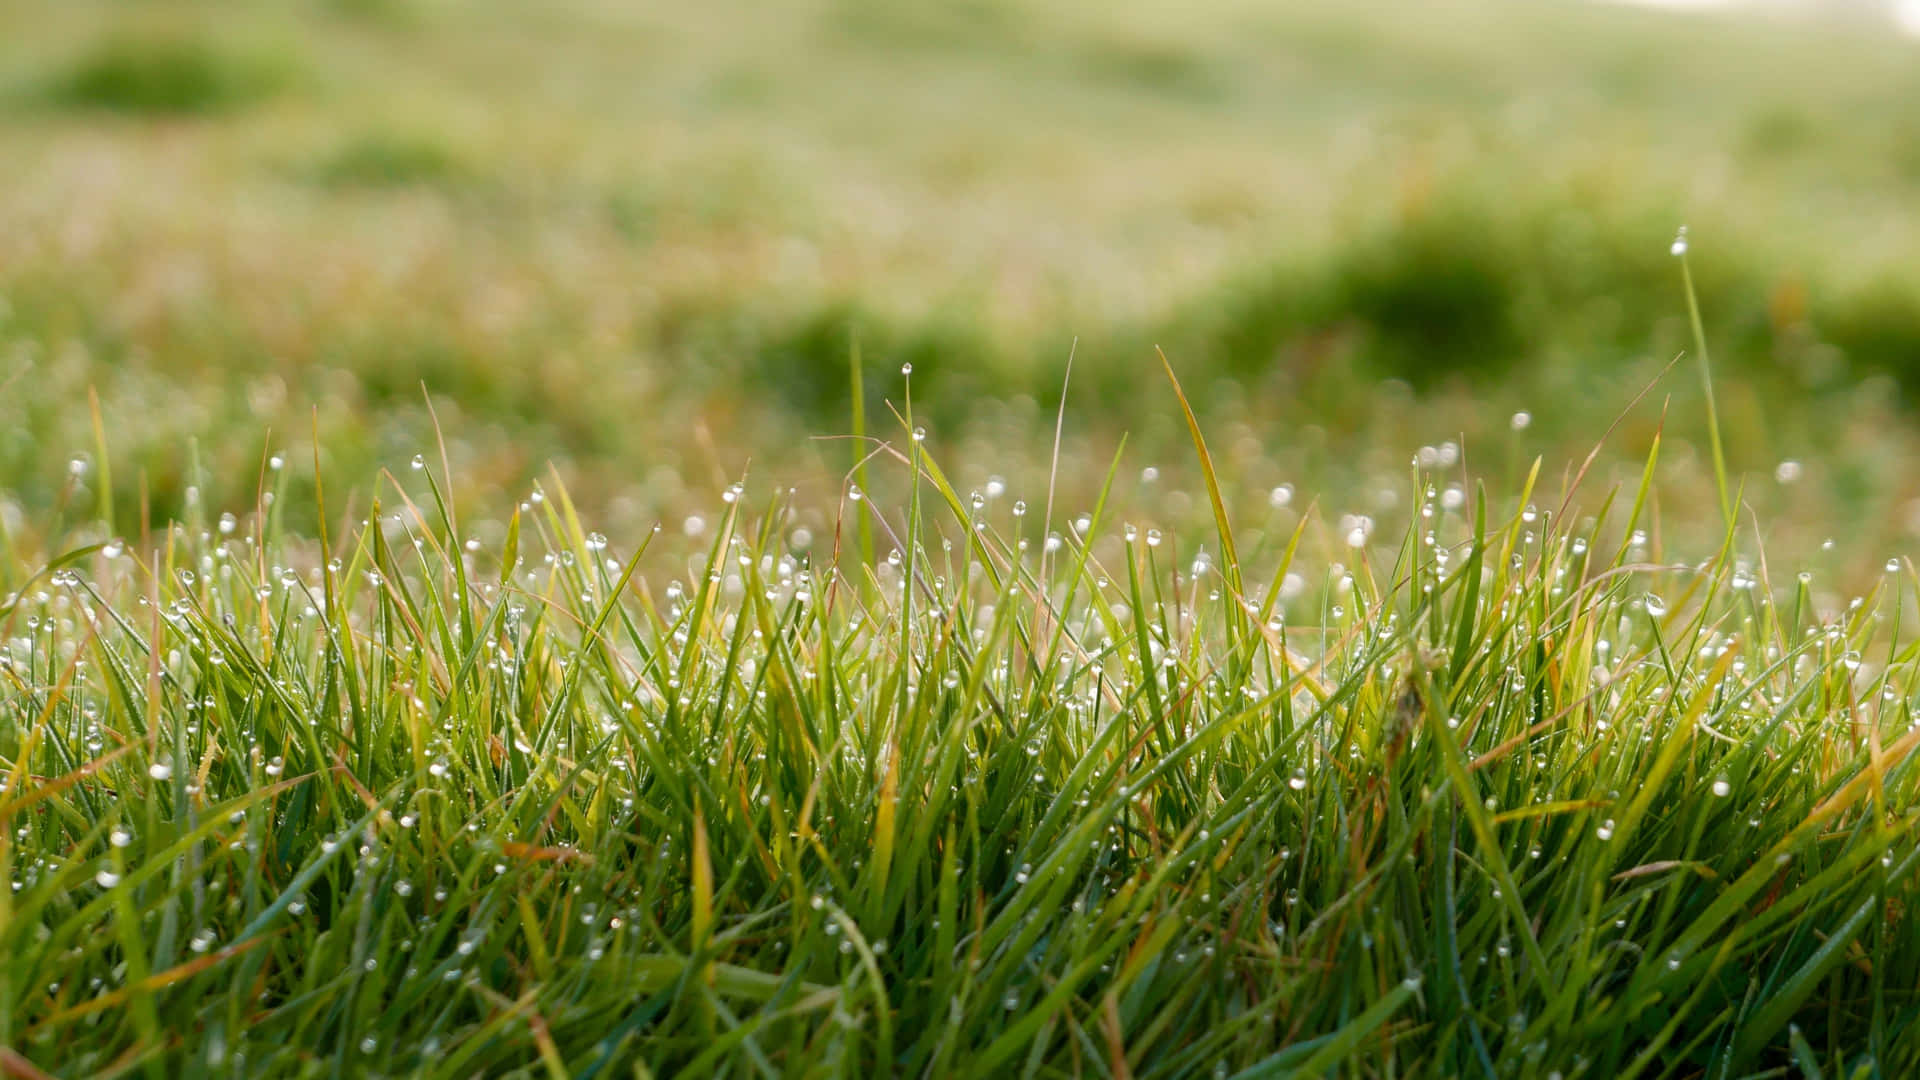 Green Grass Water Droplets Blur Picture